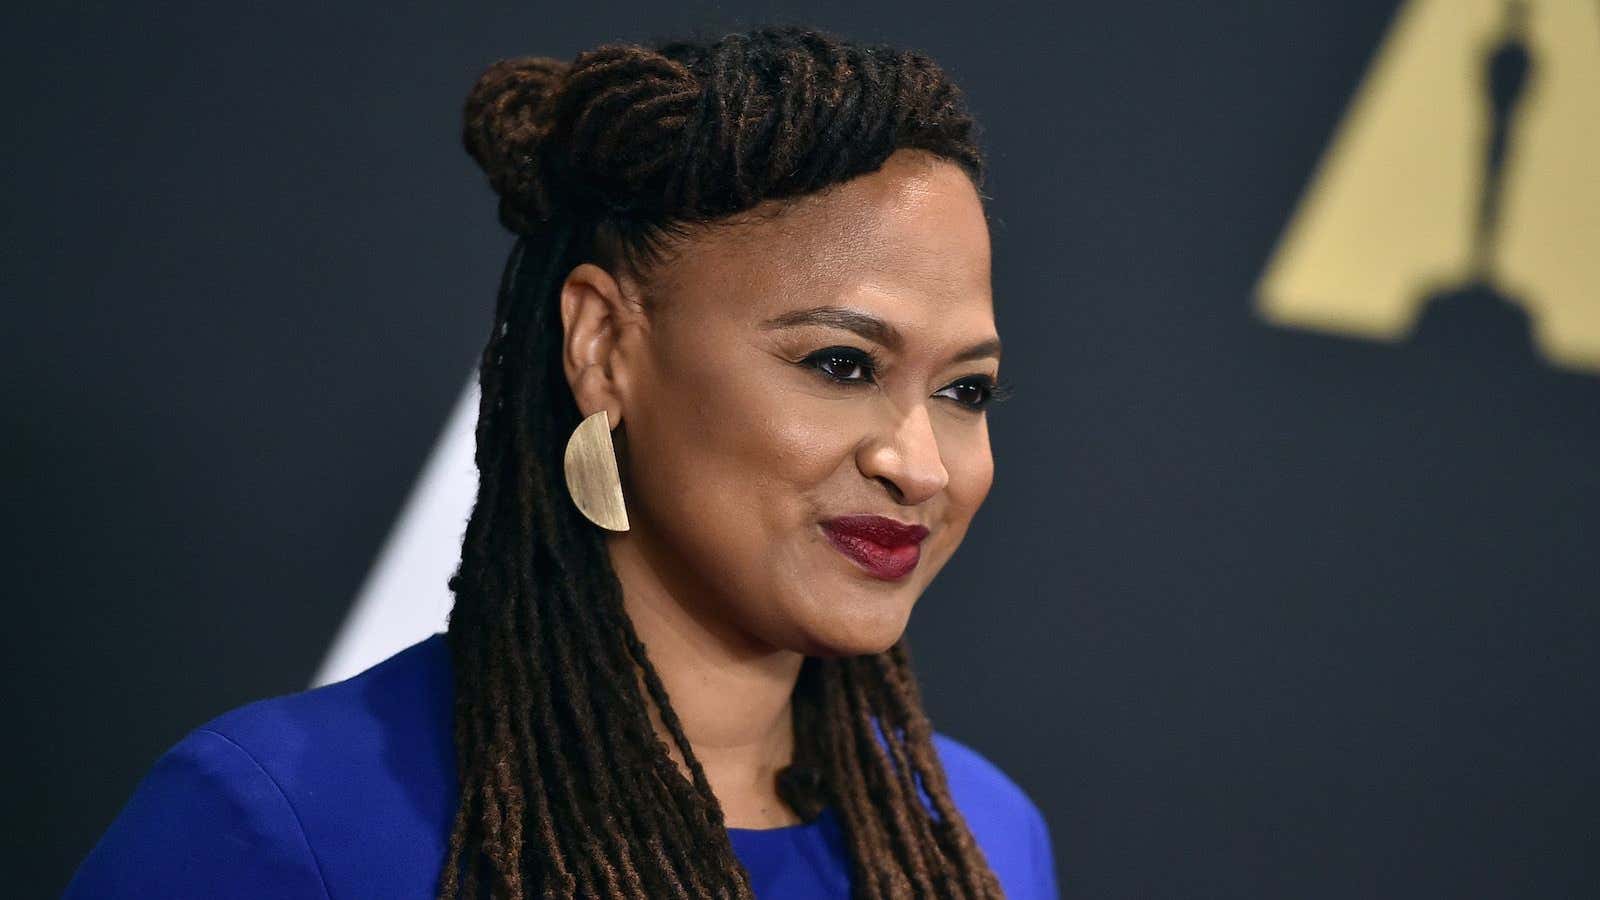 Director Ava DuVernay is one of many women in film calling attention to Hollywood’s diversity problem.